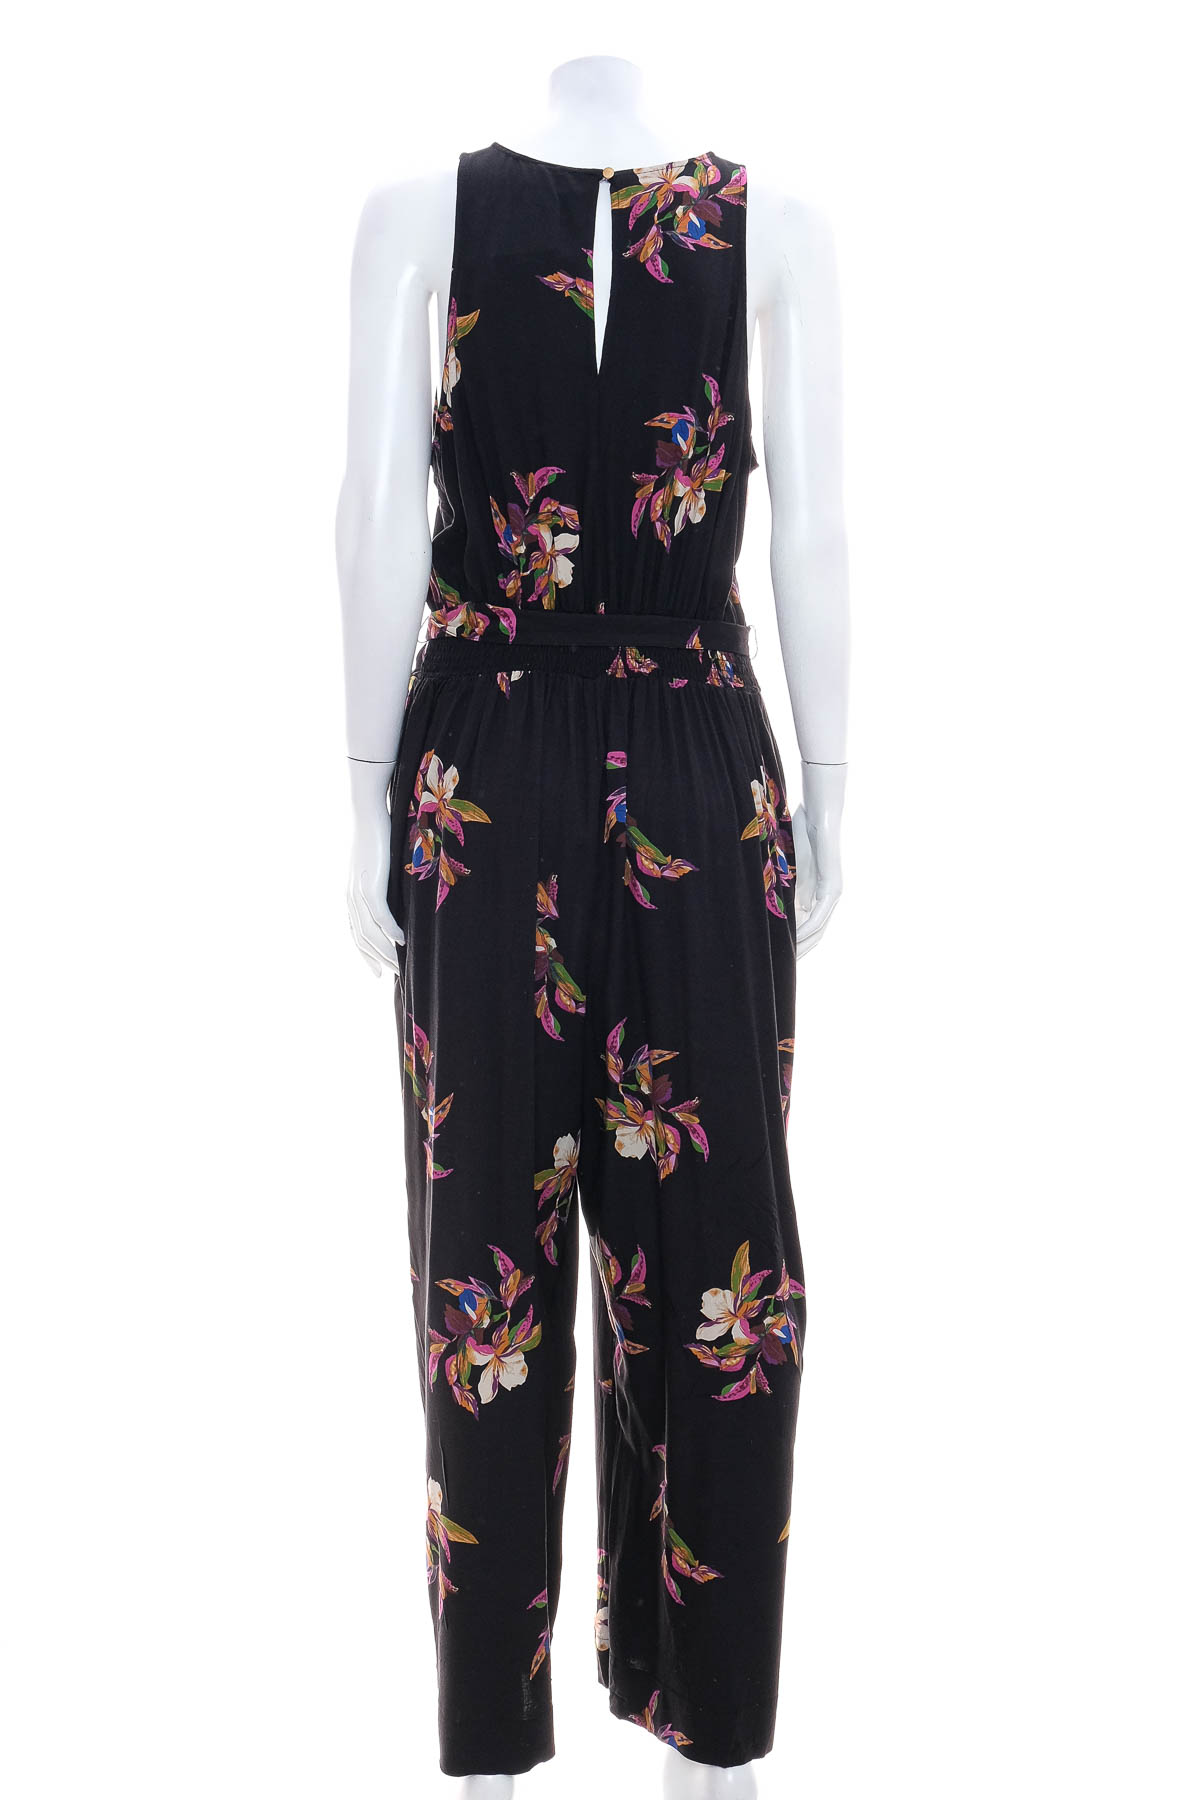 Women's jumpsuit - A new day - 1